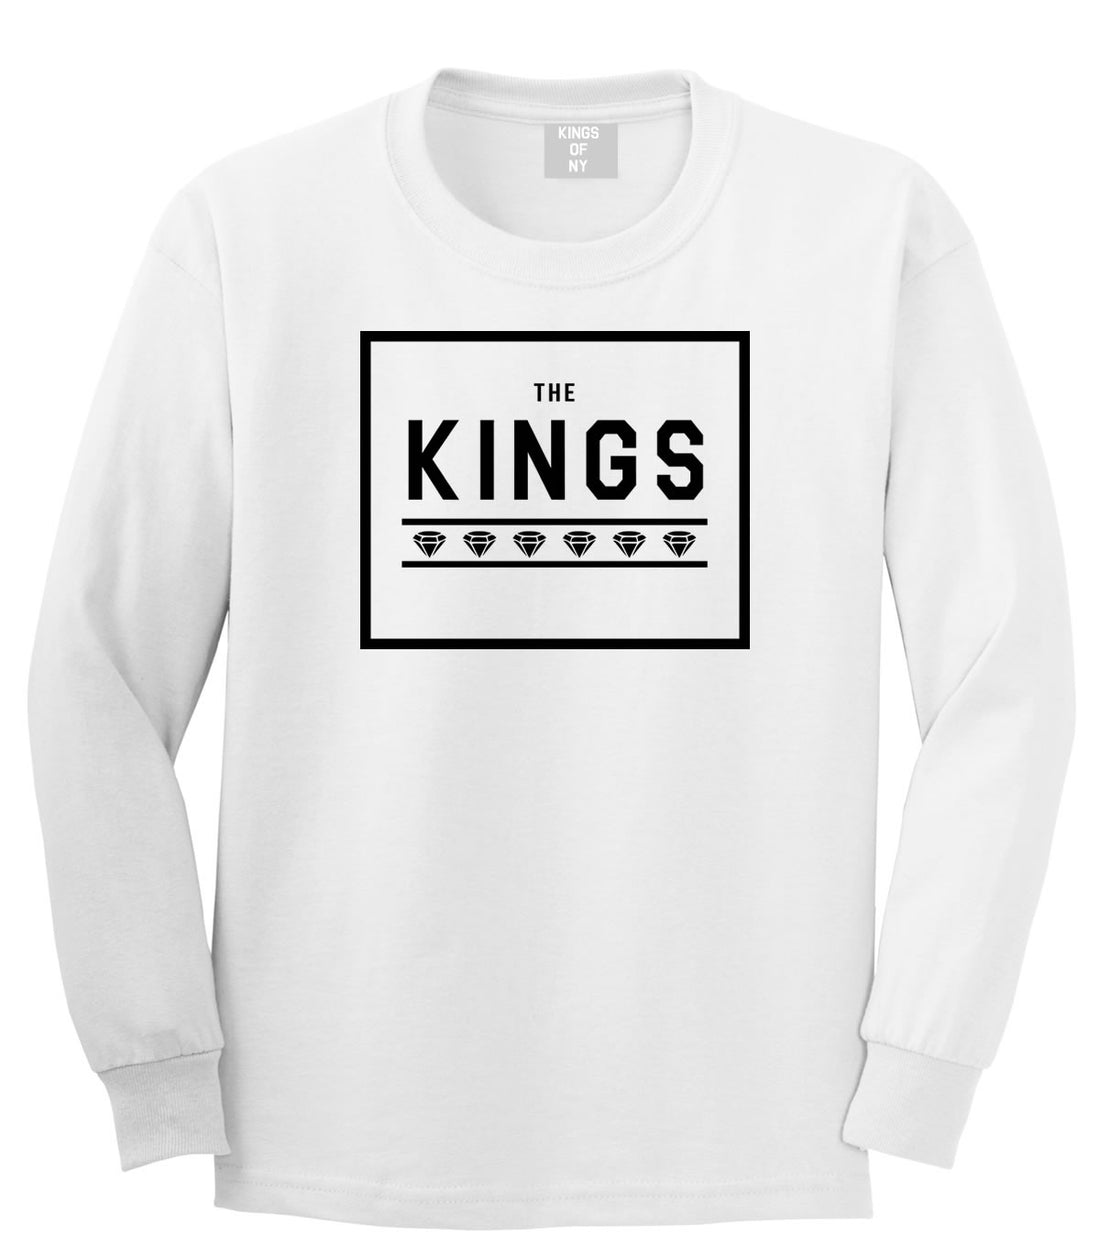 The Kings Diamonds Boys Kids Long Sleeve T-Shirt in White by Kings Of NY